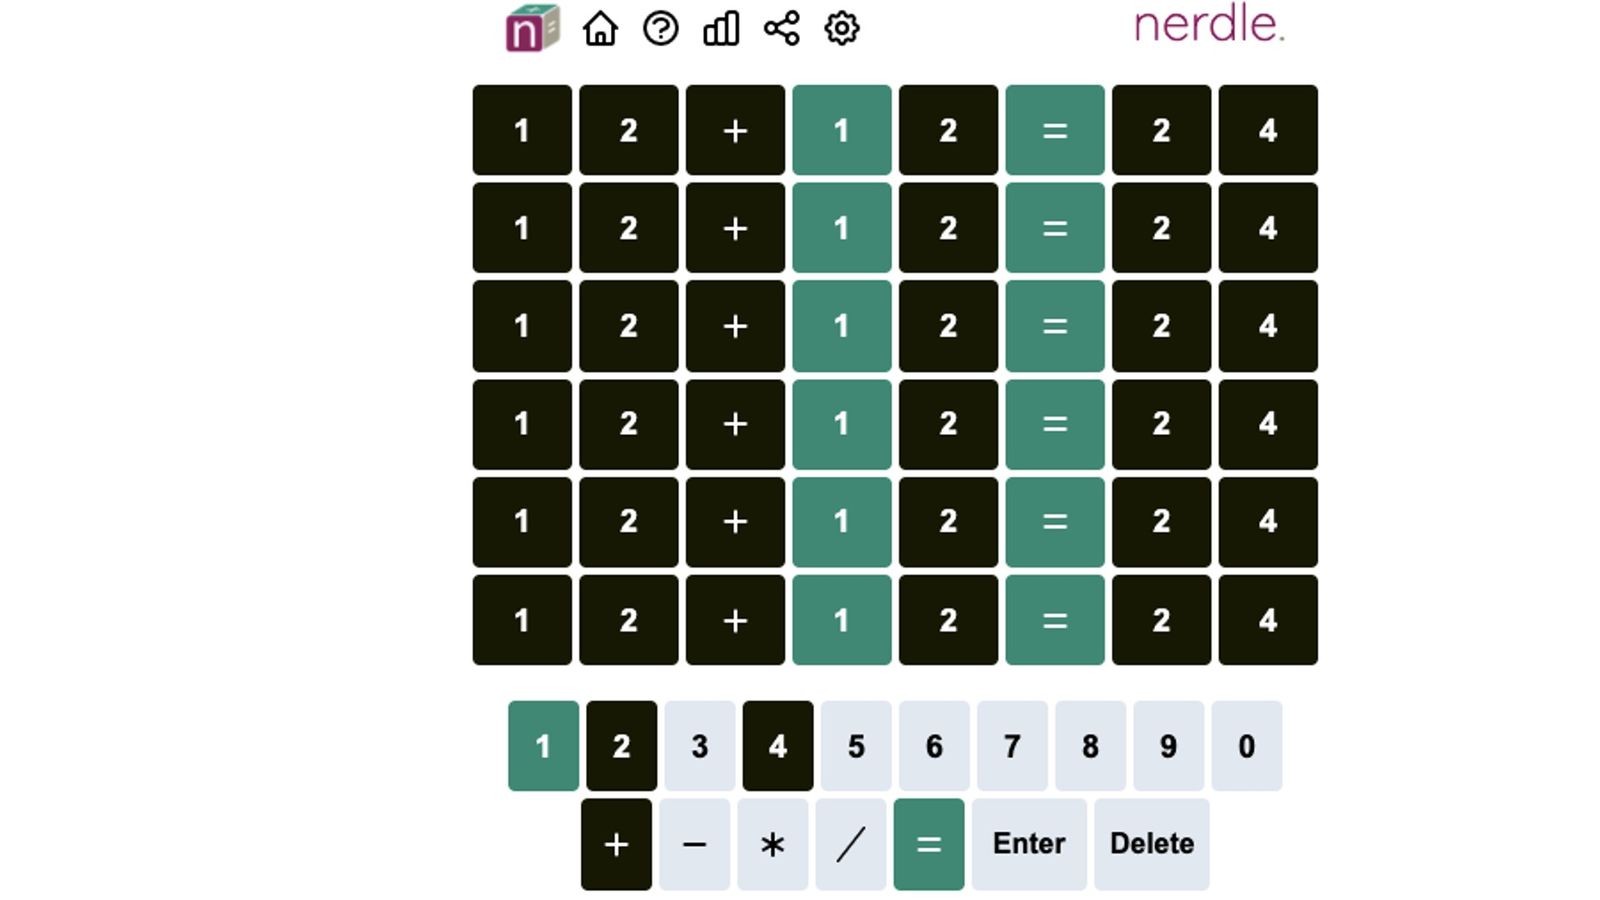 Image of a failed attempt on the Nerdle guessing grid